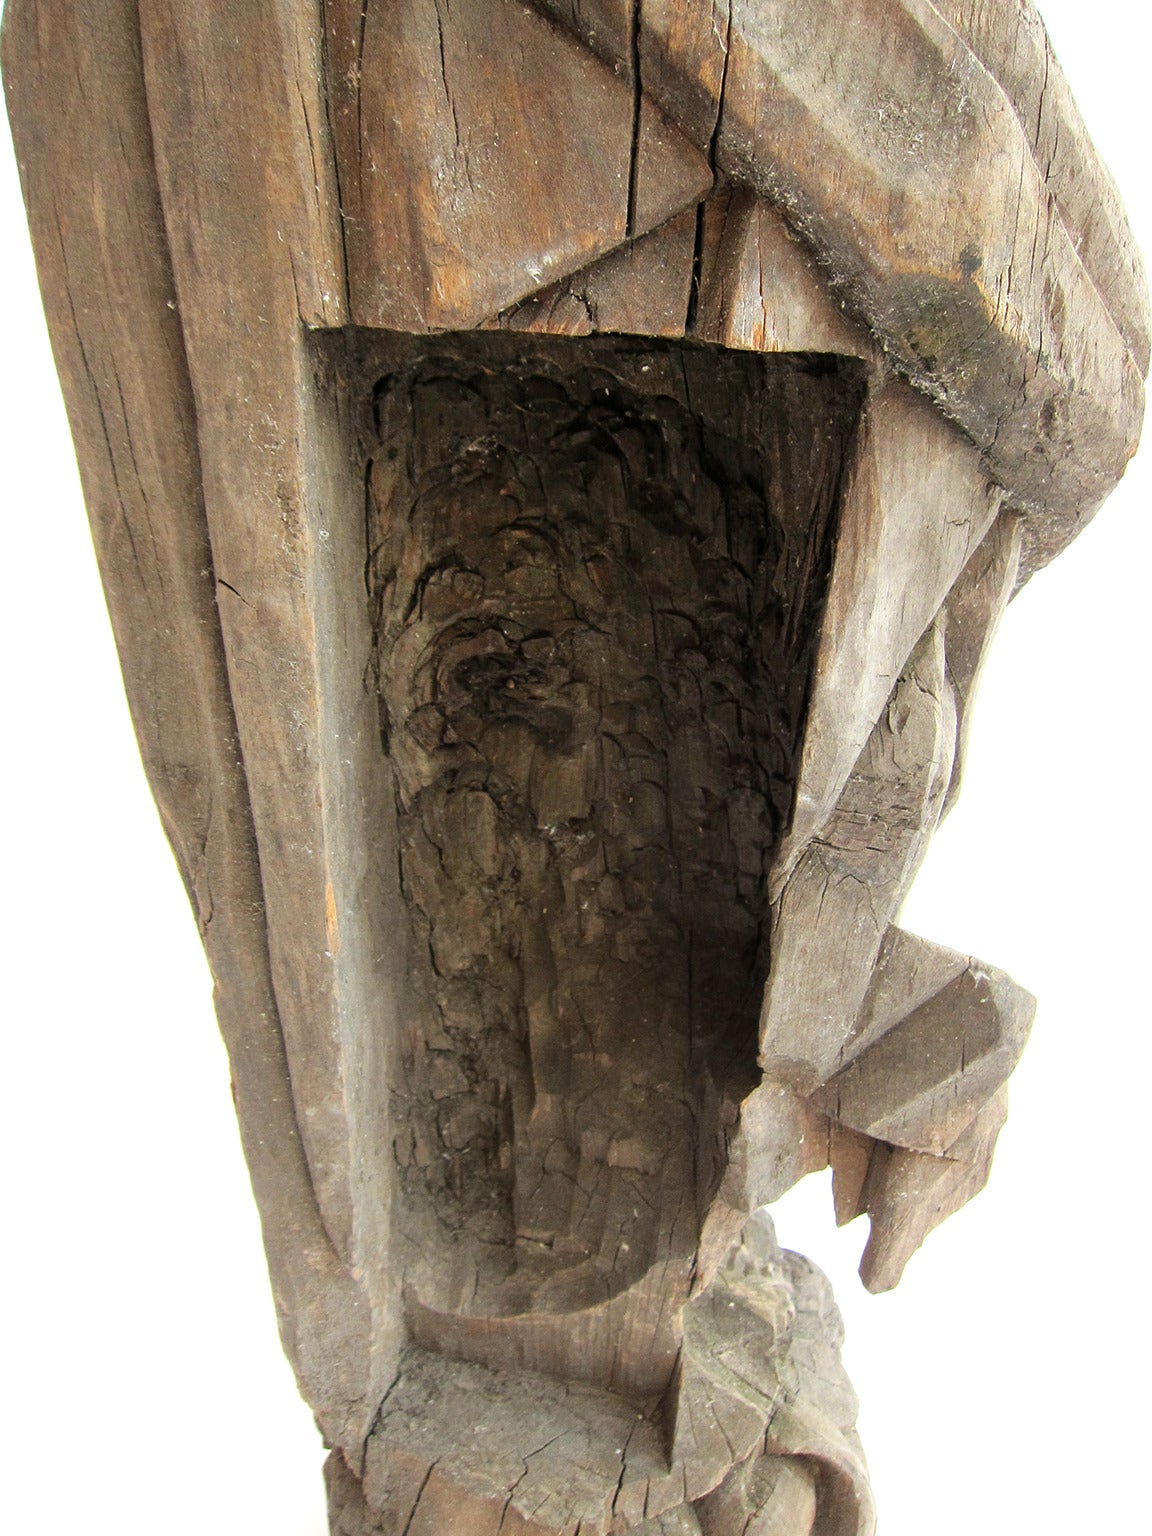 Wood La Immaculada, Hand-Carved Sculpture